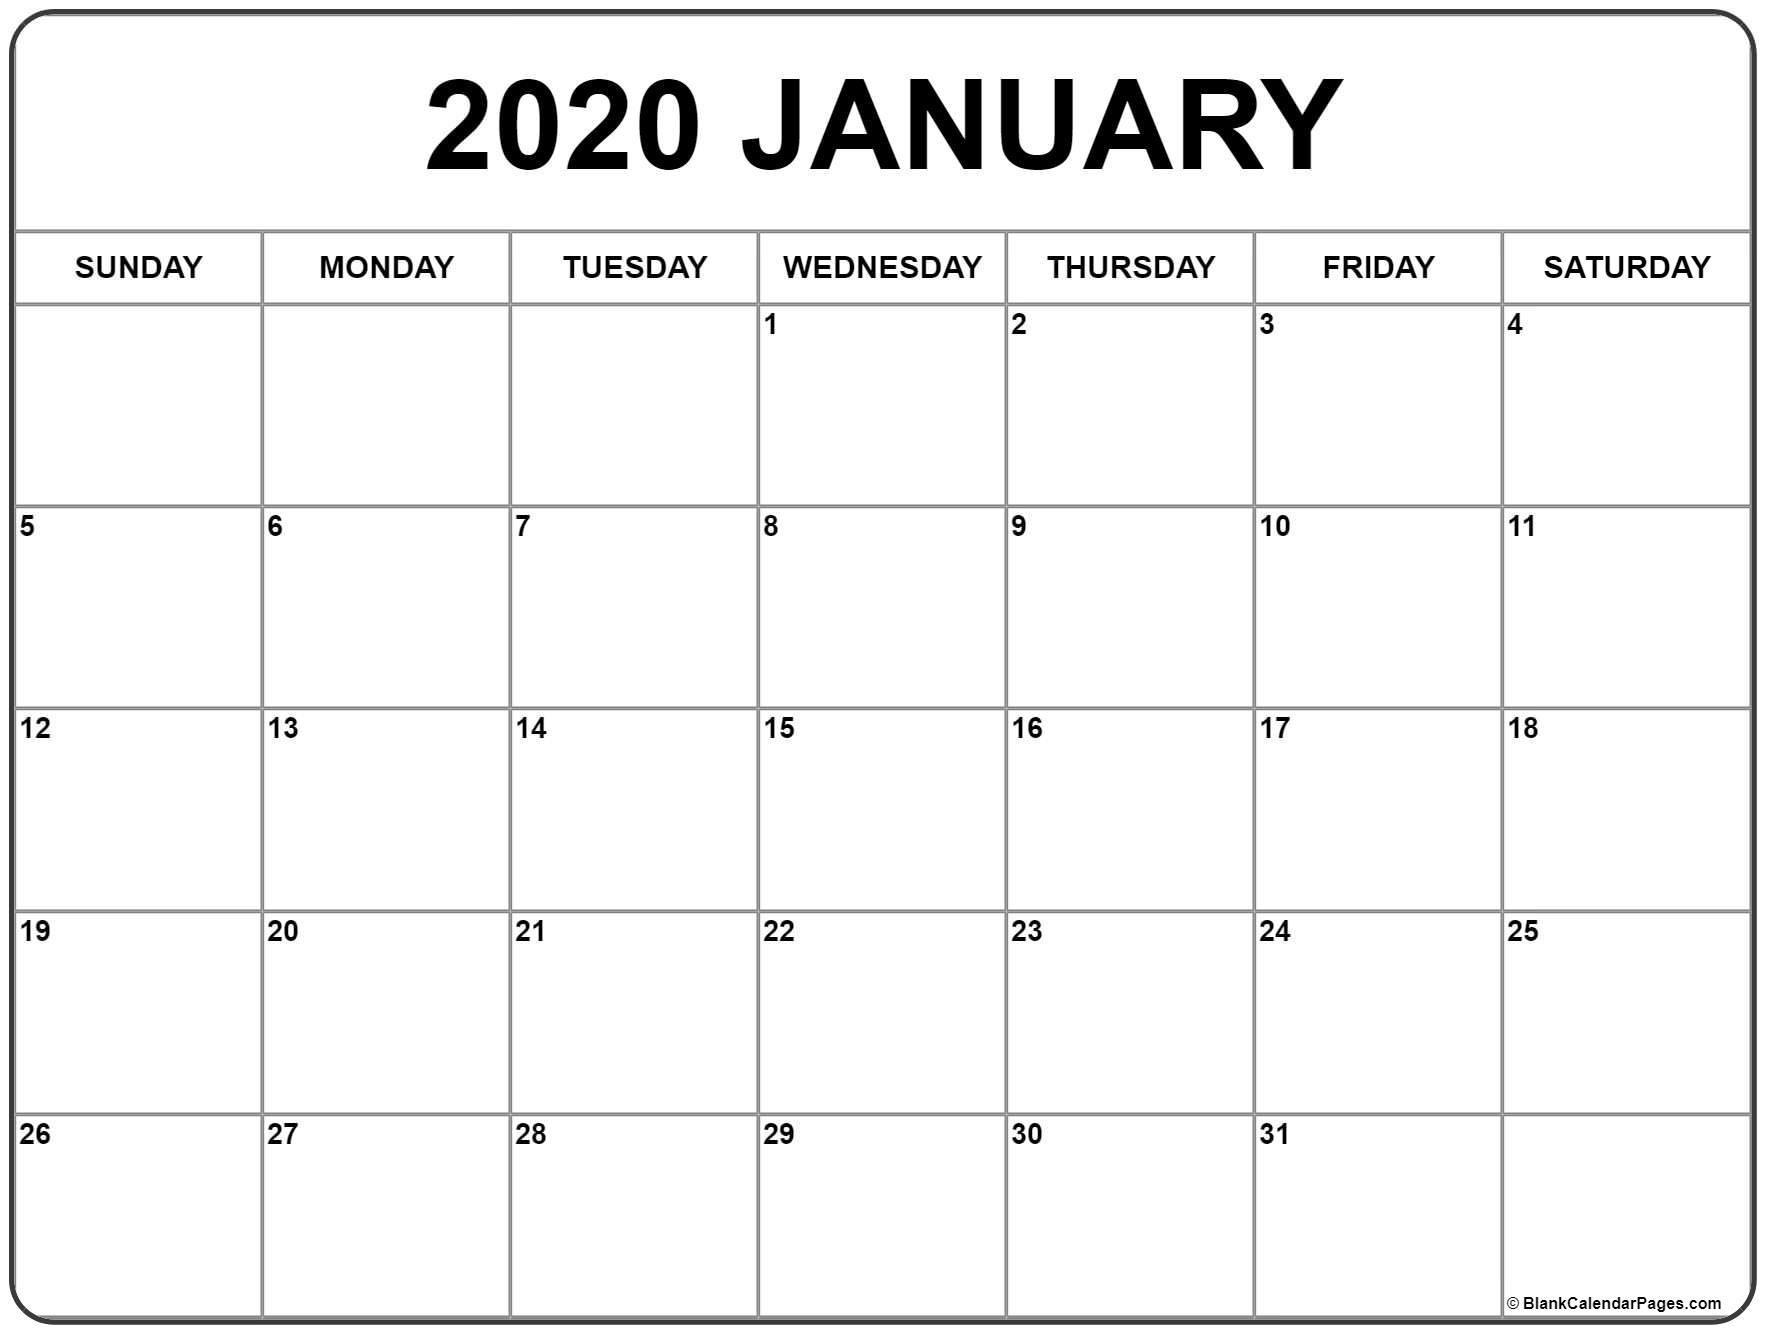 January 2020 Calendar | Free Printable Monthly Calendars  Print Free Calendars Without Downloading